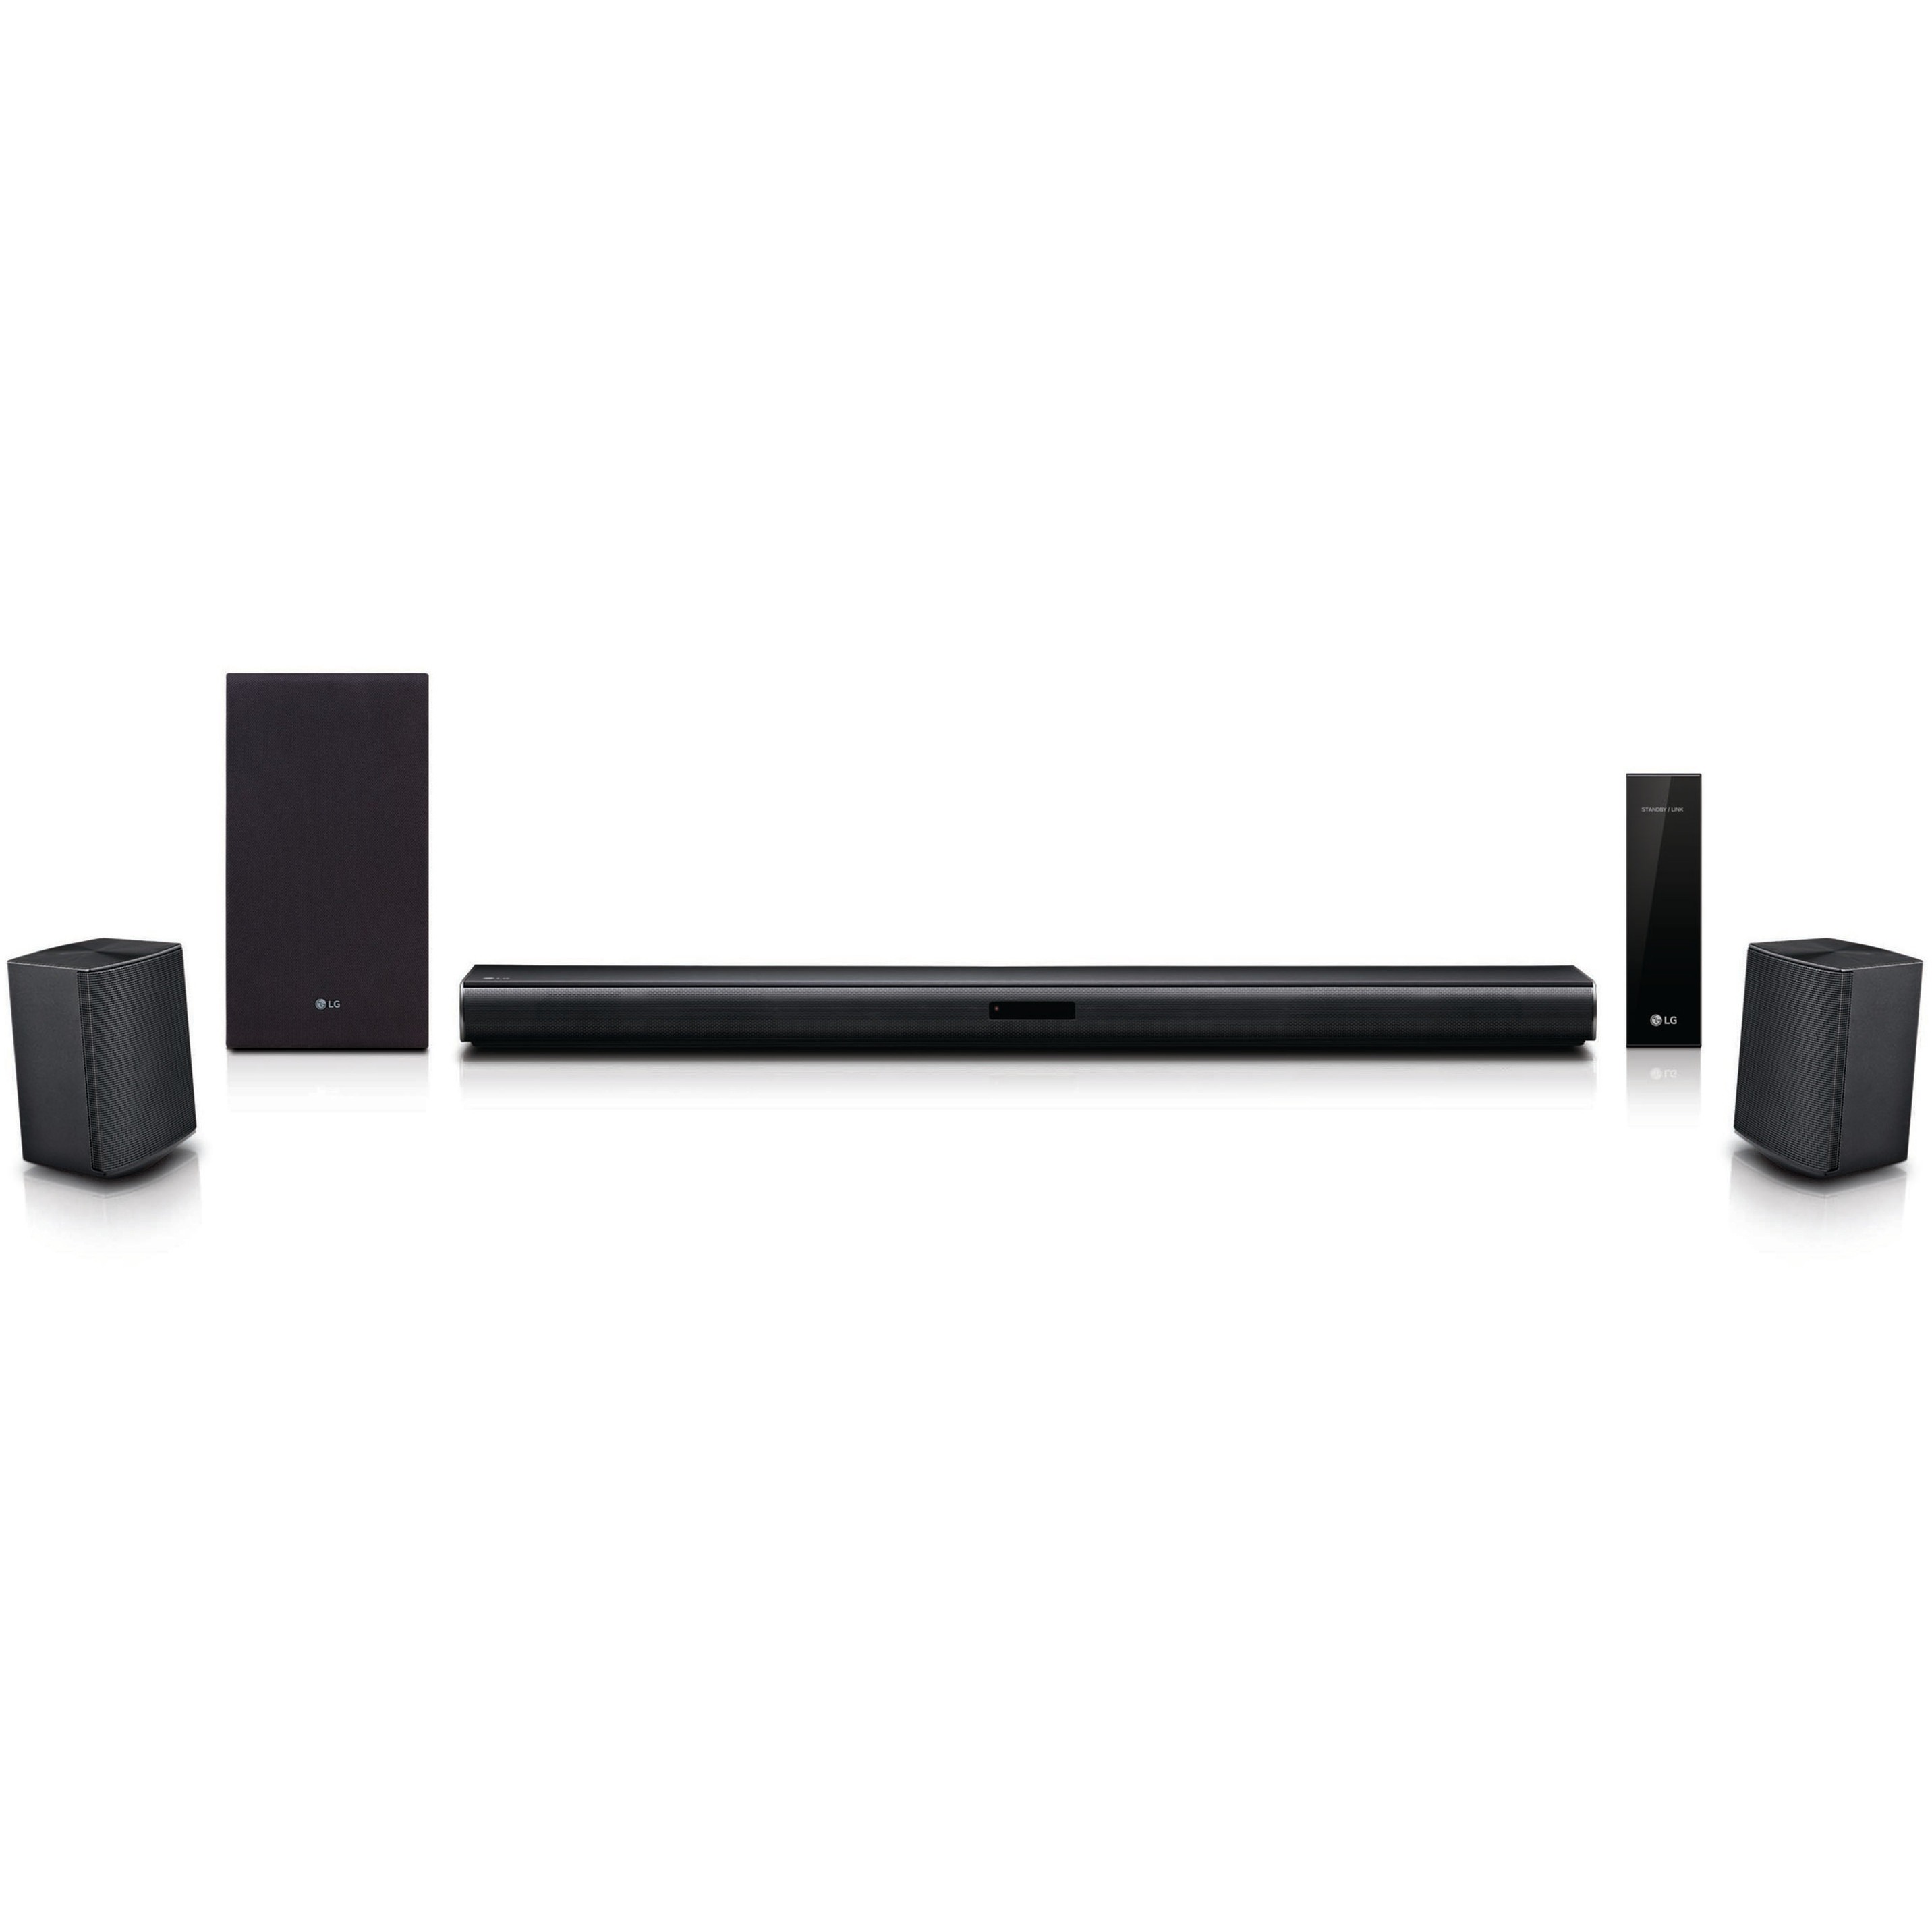 LG 4.1 Channel Soundbar Surround System with Wireless Subwoofer - SJ4R - image 3 of 6